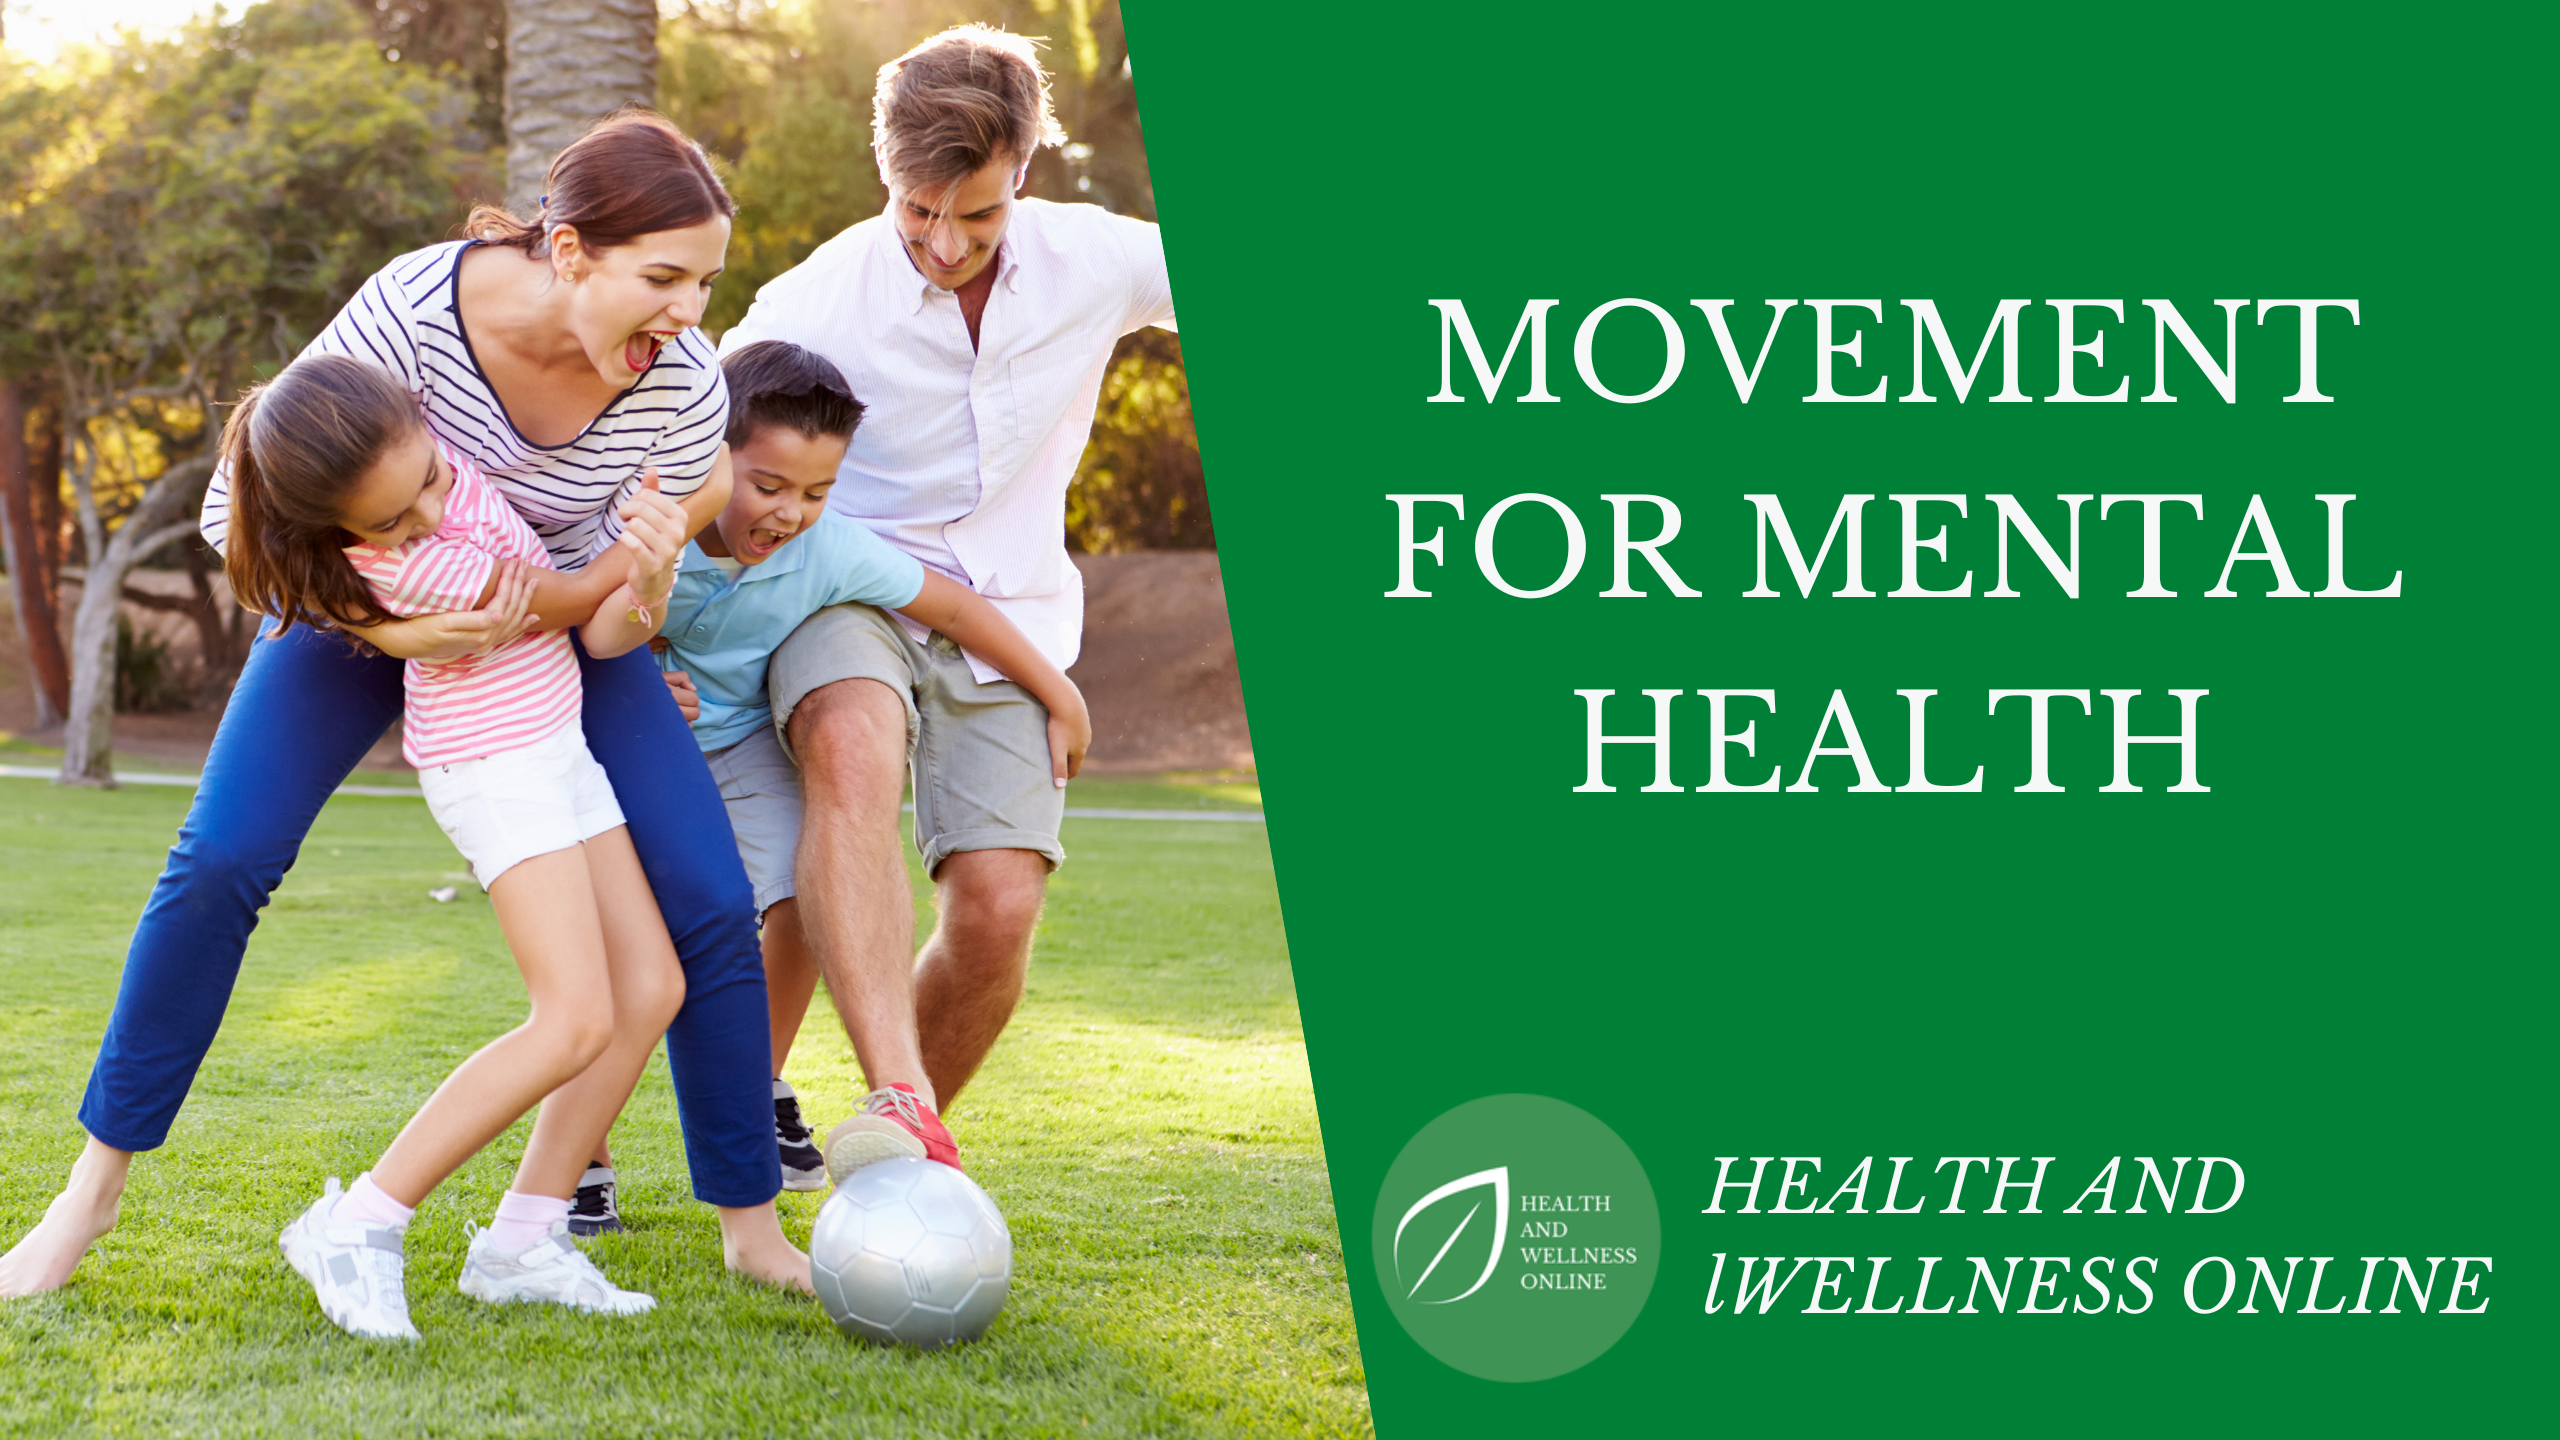 Movement for Mental Health is a Course by Dr. Donna Poppendieck from Health and Wellness Online.